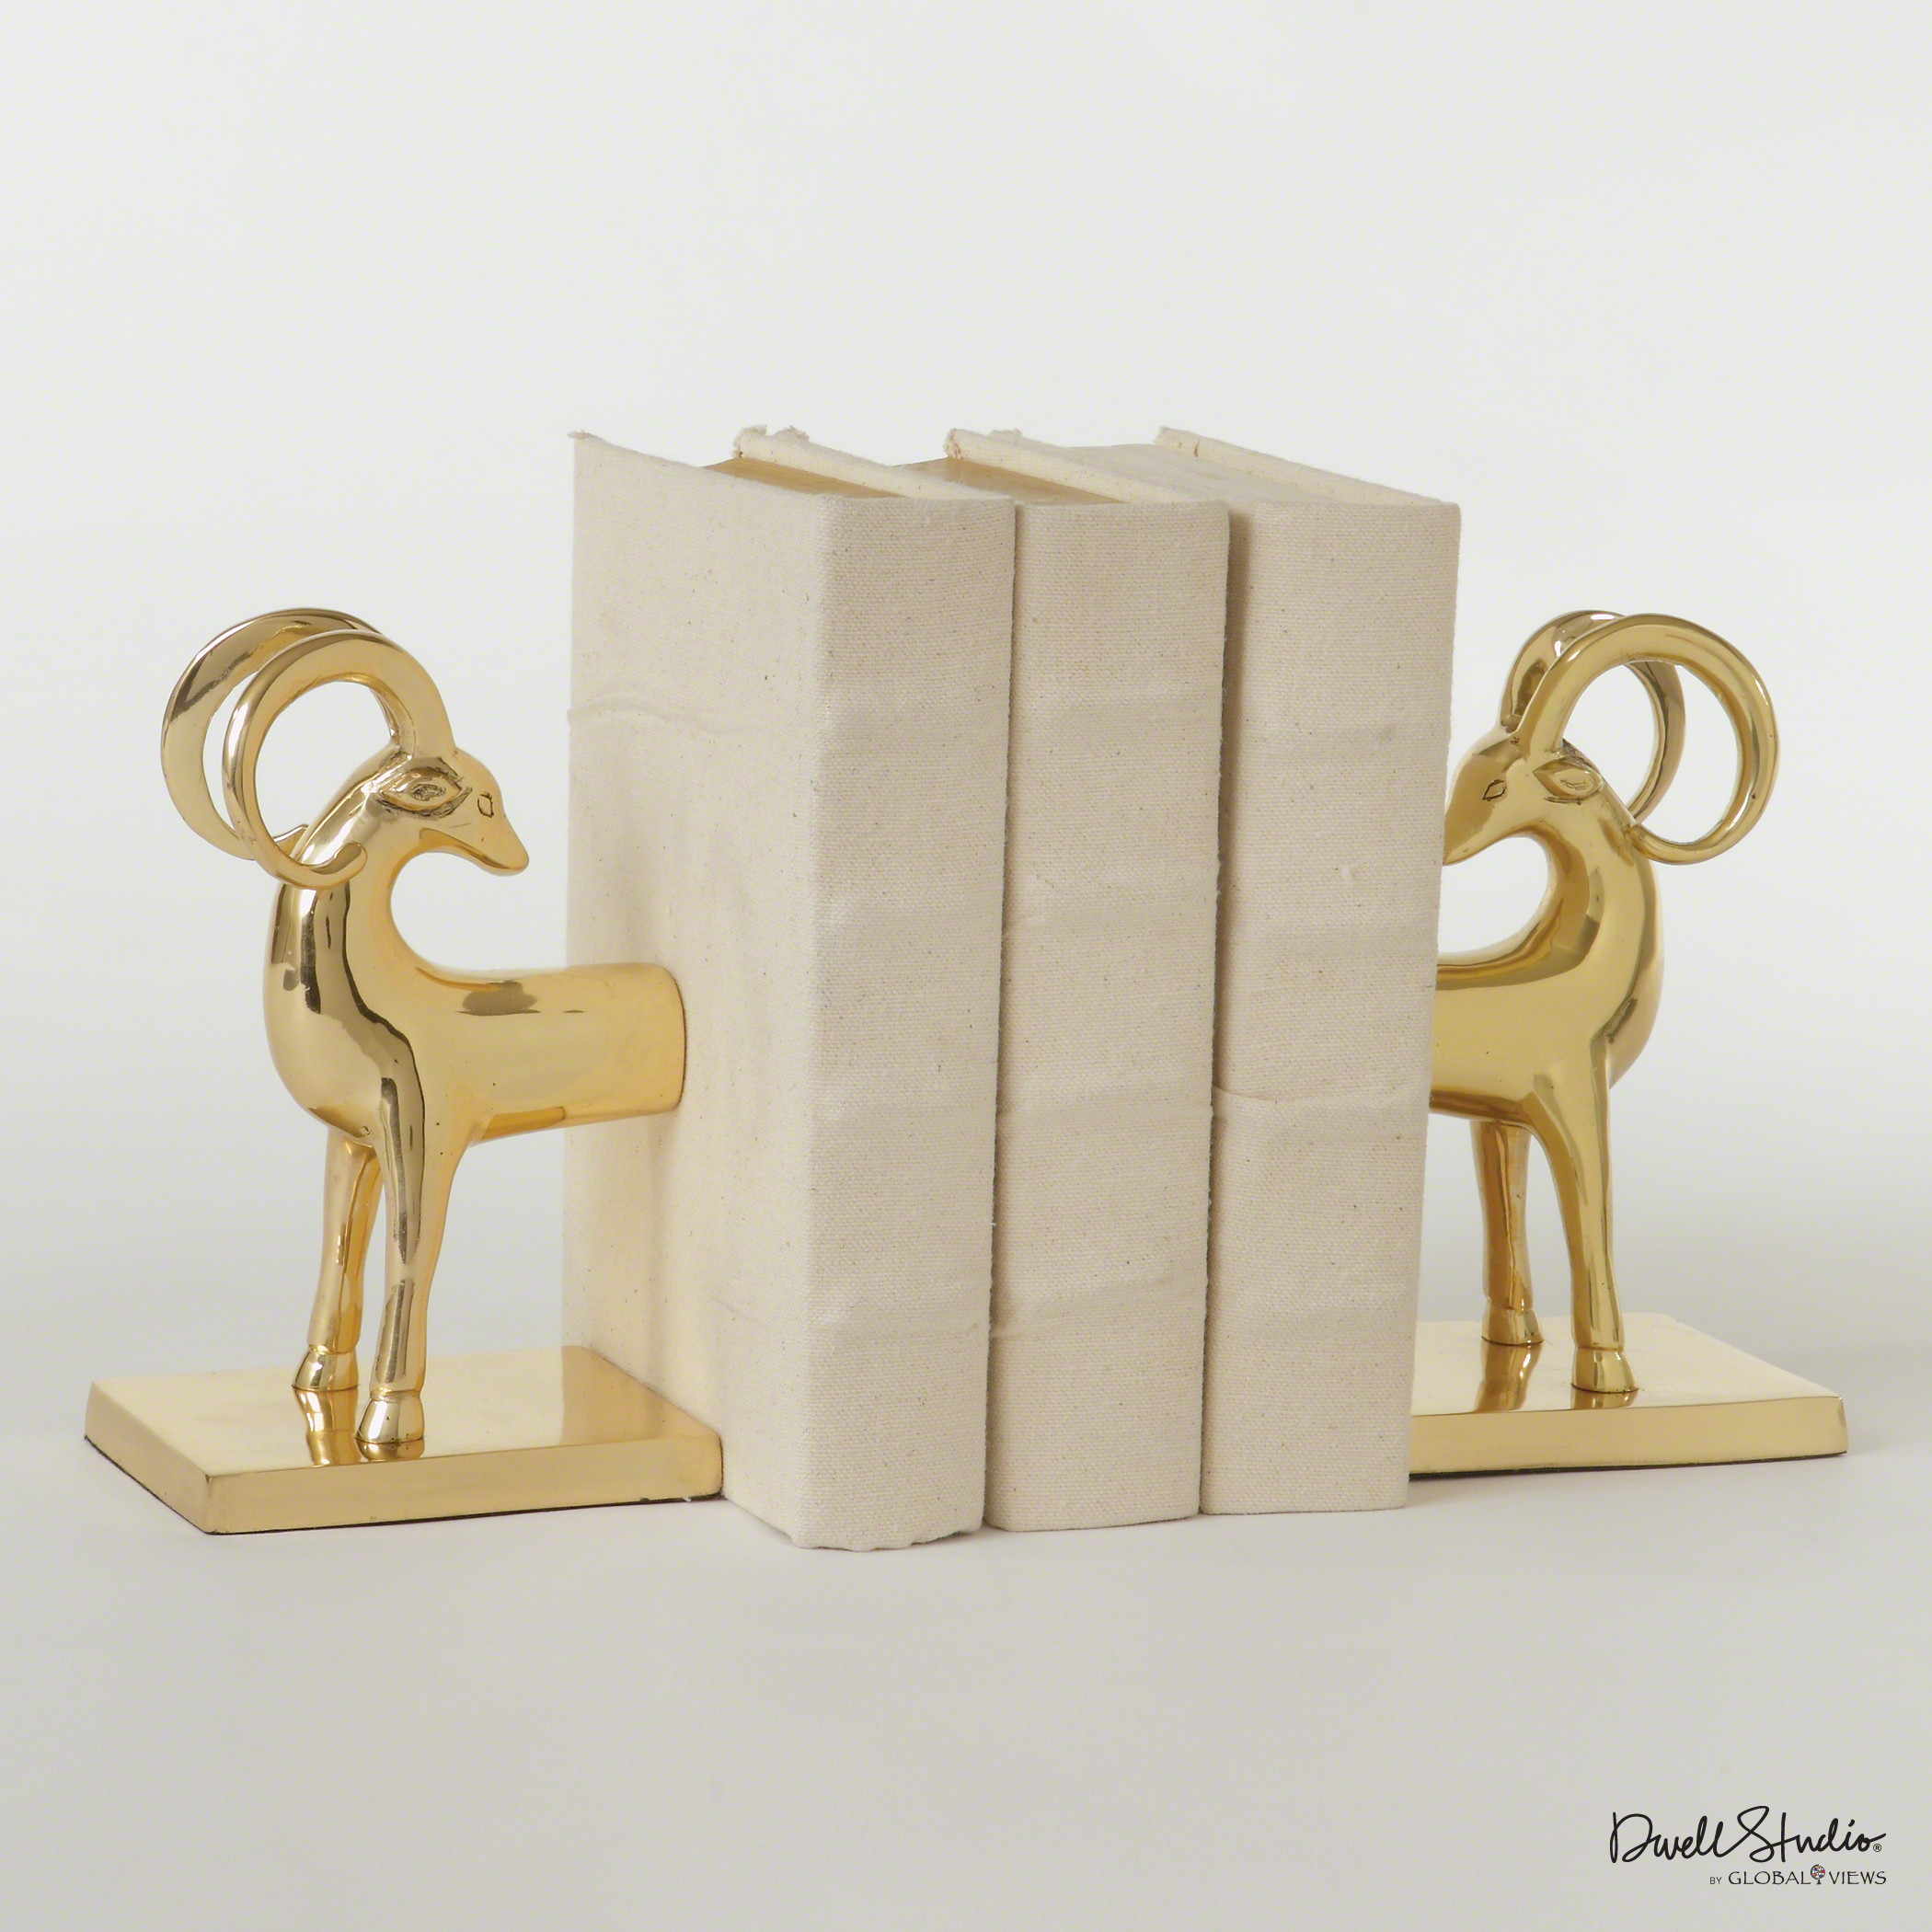 Brass bookends from Global View.